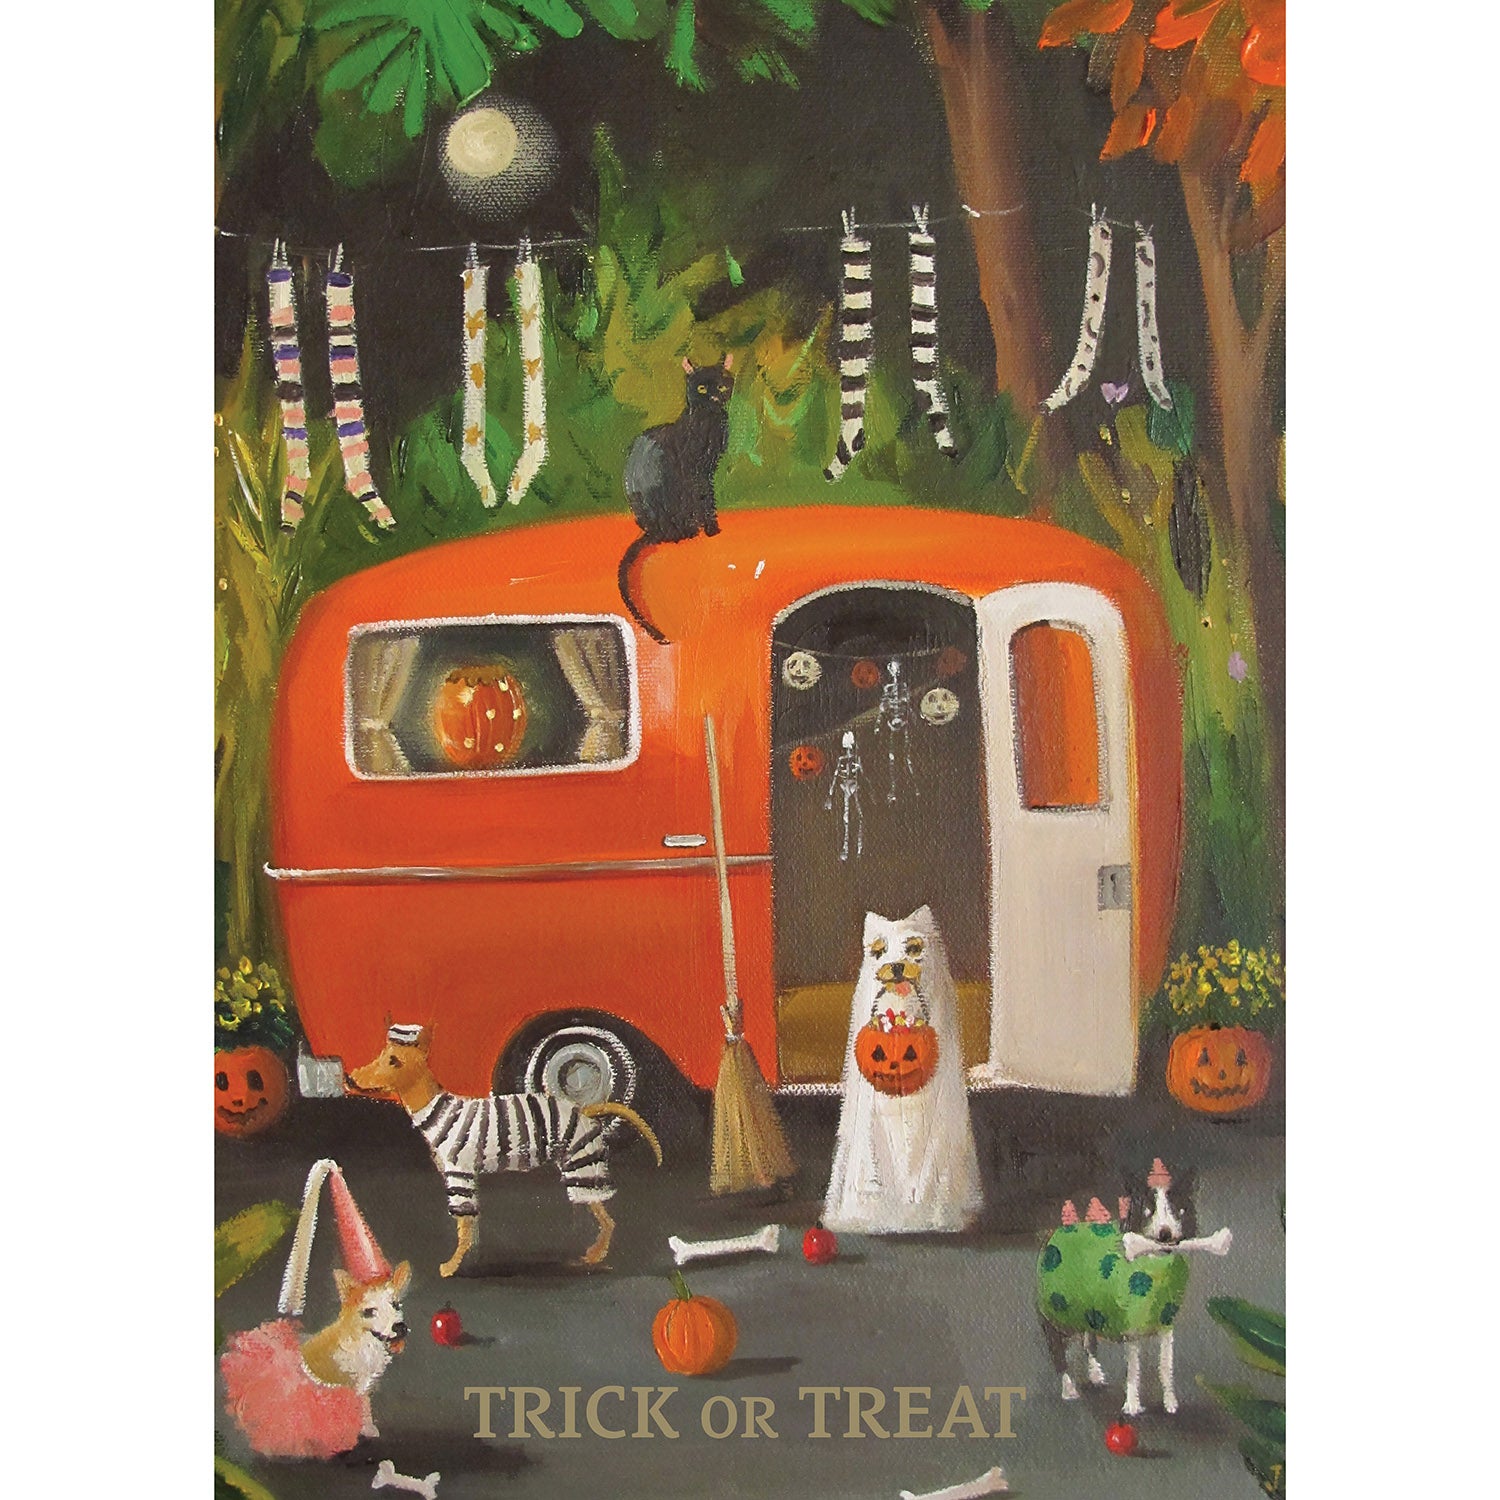 A painterly illustration of a small, orange vintage recreational trailer surrounded by dogs in Halloween costumes and jack-o-lanterns, with a black cat sitting on top. The card reads &quot;TRICK OR TREAT&quot; across the bottom. 